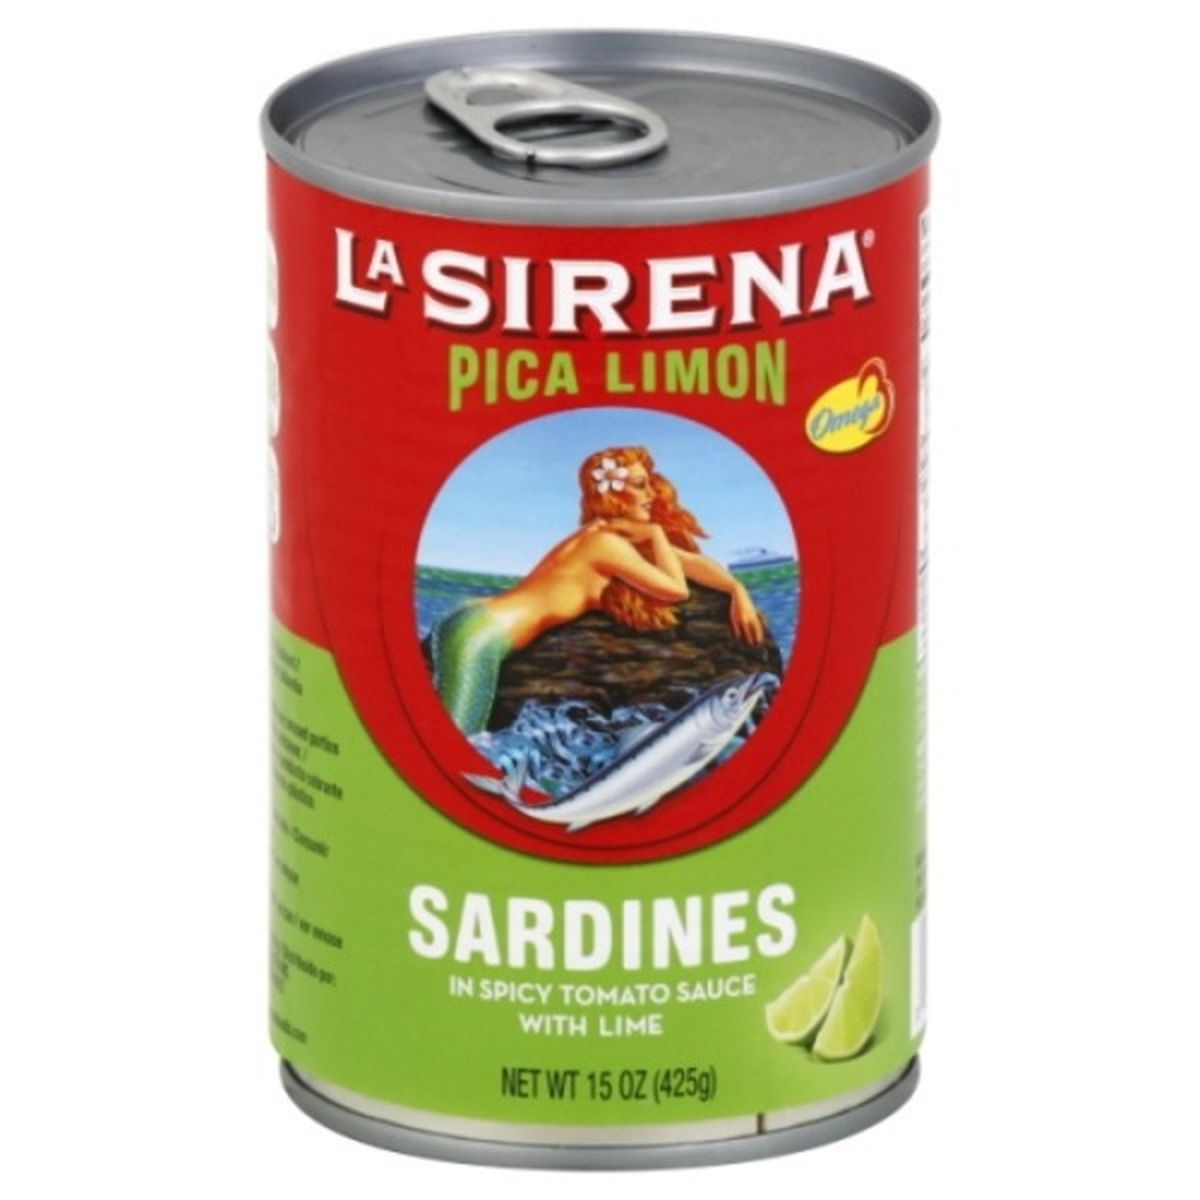 Calories in La Sirena Pica Limon Sardines, in Spicy Tomato Sauce with Lime